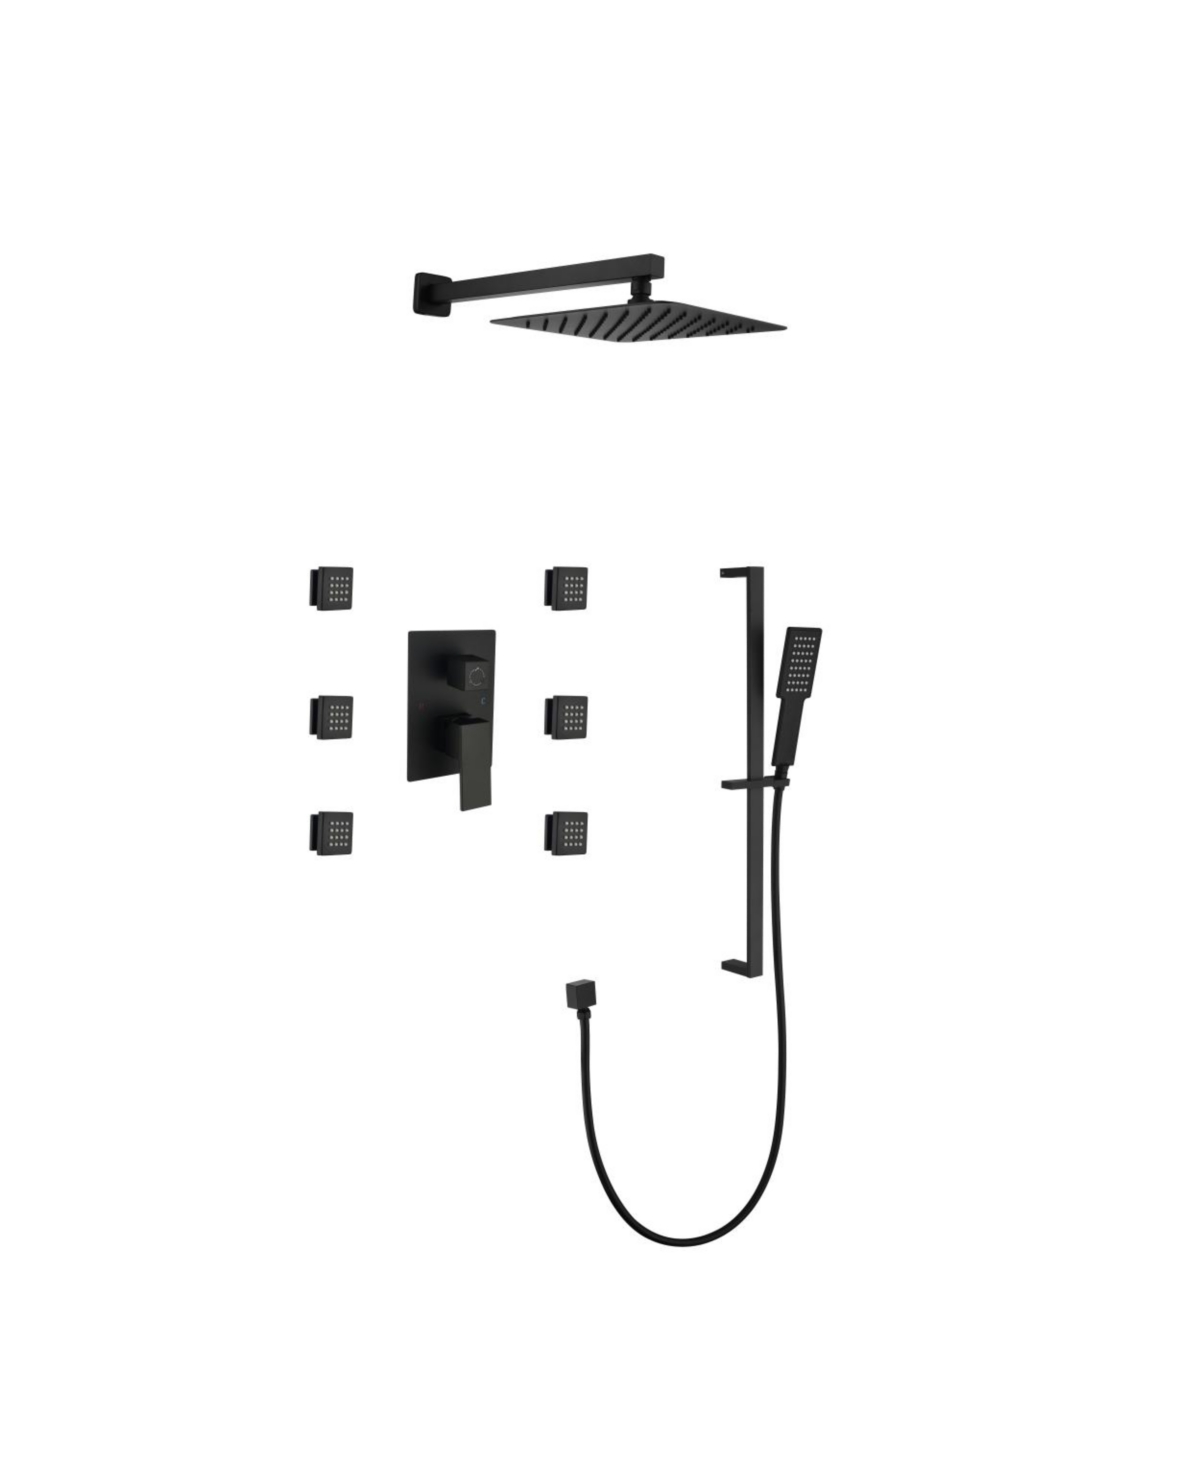 Wall Mounted Waterfall Rain Shower System With 3 Body Sprays & Handheld Shower - Black